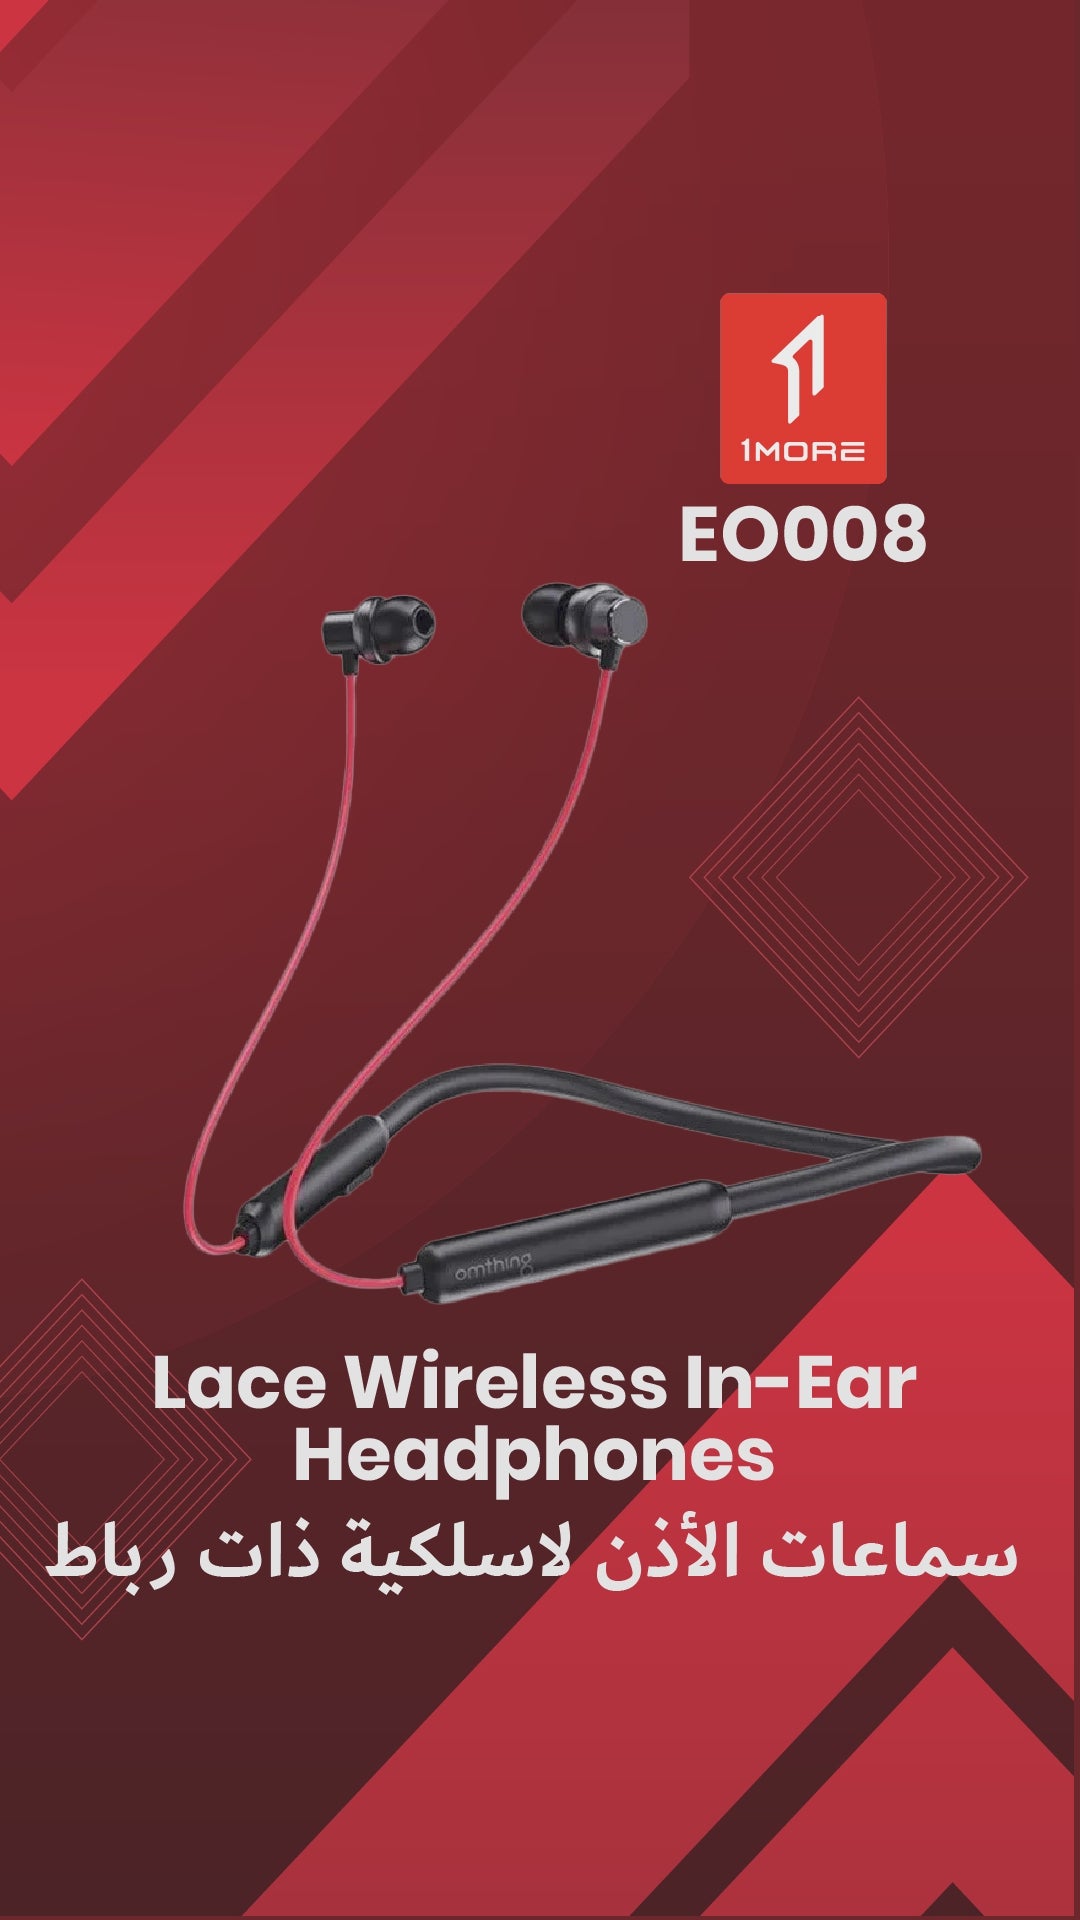 1MORE EO008 Omthing AirFree Lace Wireless In-Ear - Black